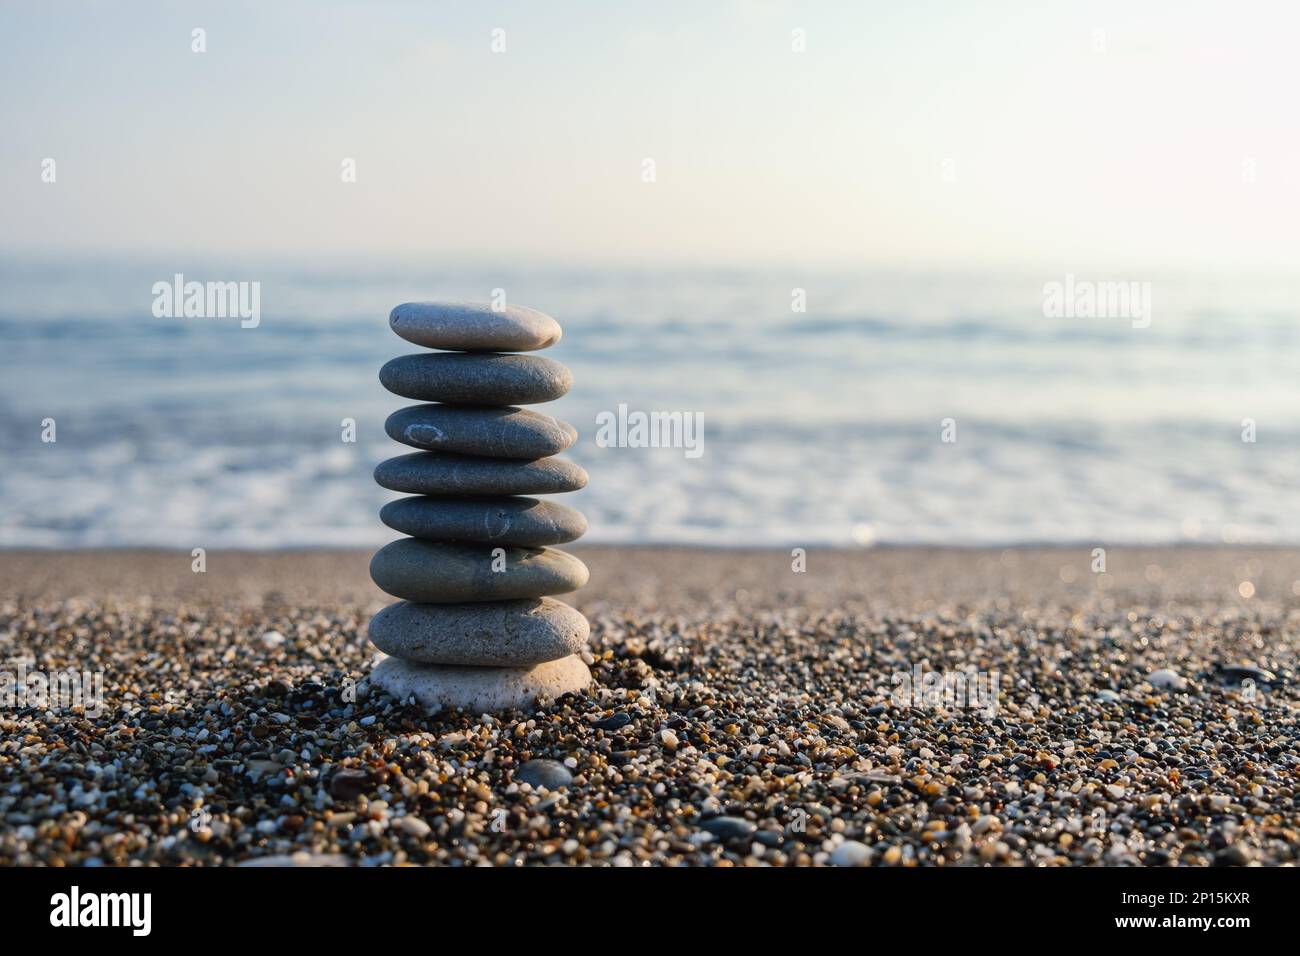 Balanced pebble pyramid at the beach. Selective focus Abstract bokeh with Sea on the background. Zen stones on the beach, meditation, spa, harmony. Stock Photo